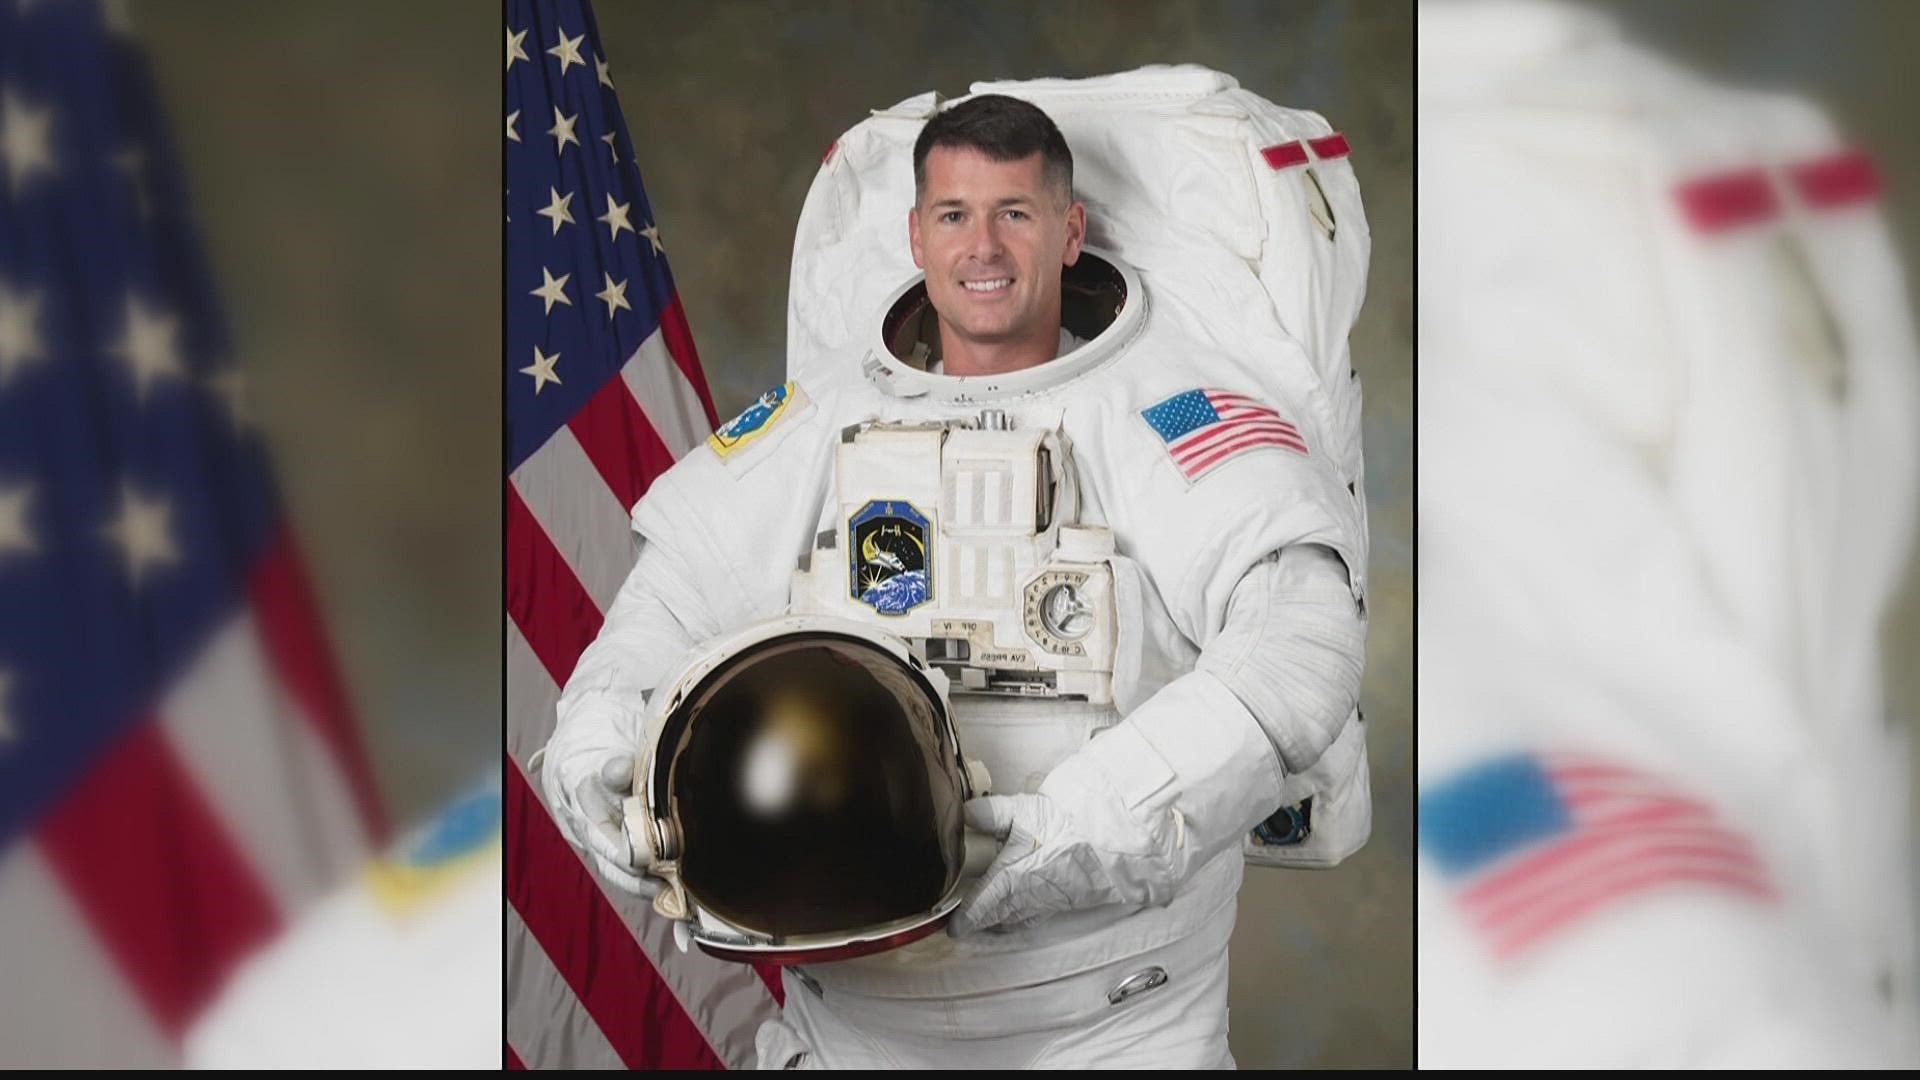 Shane Kimbrough spent 388 days in space across an 18-year career as an astronaut.